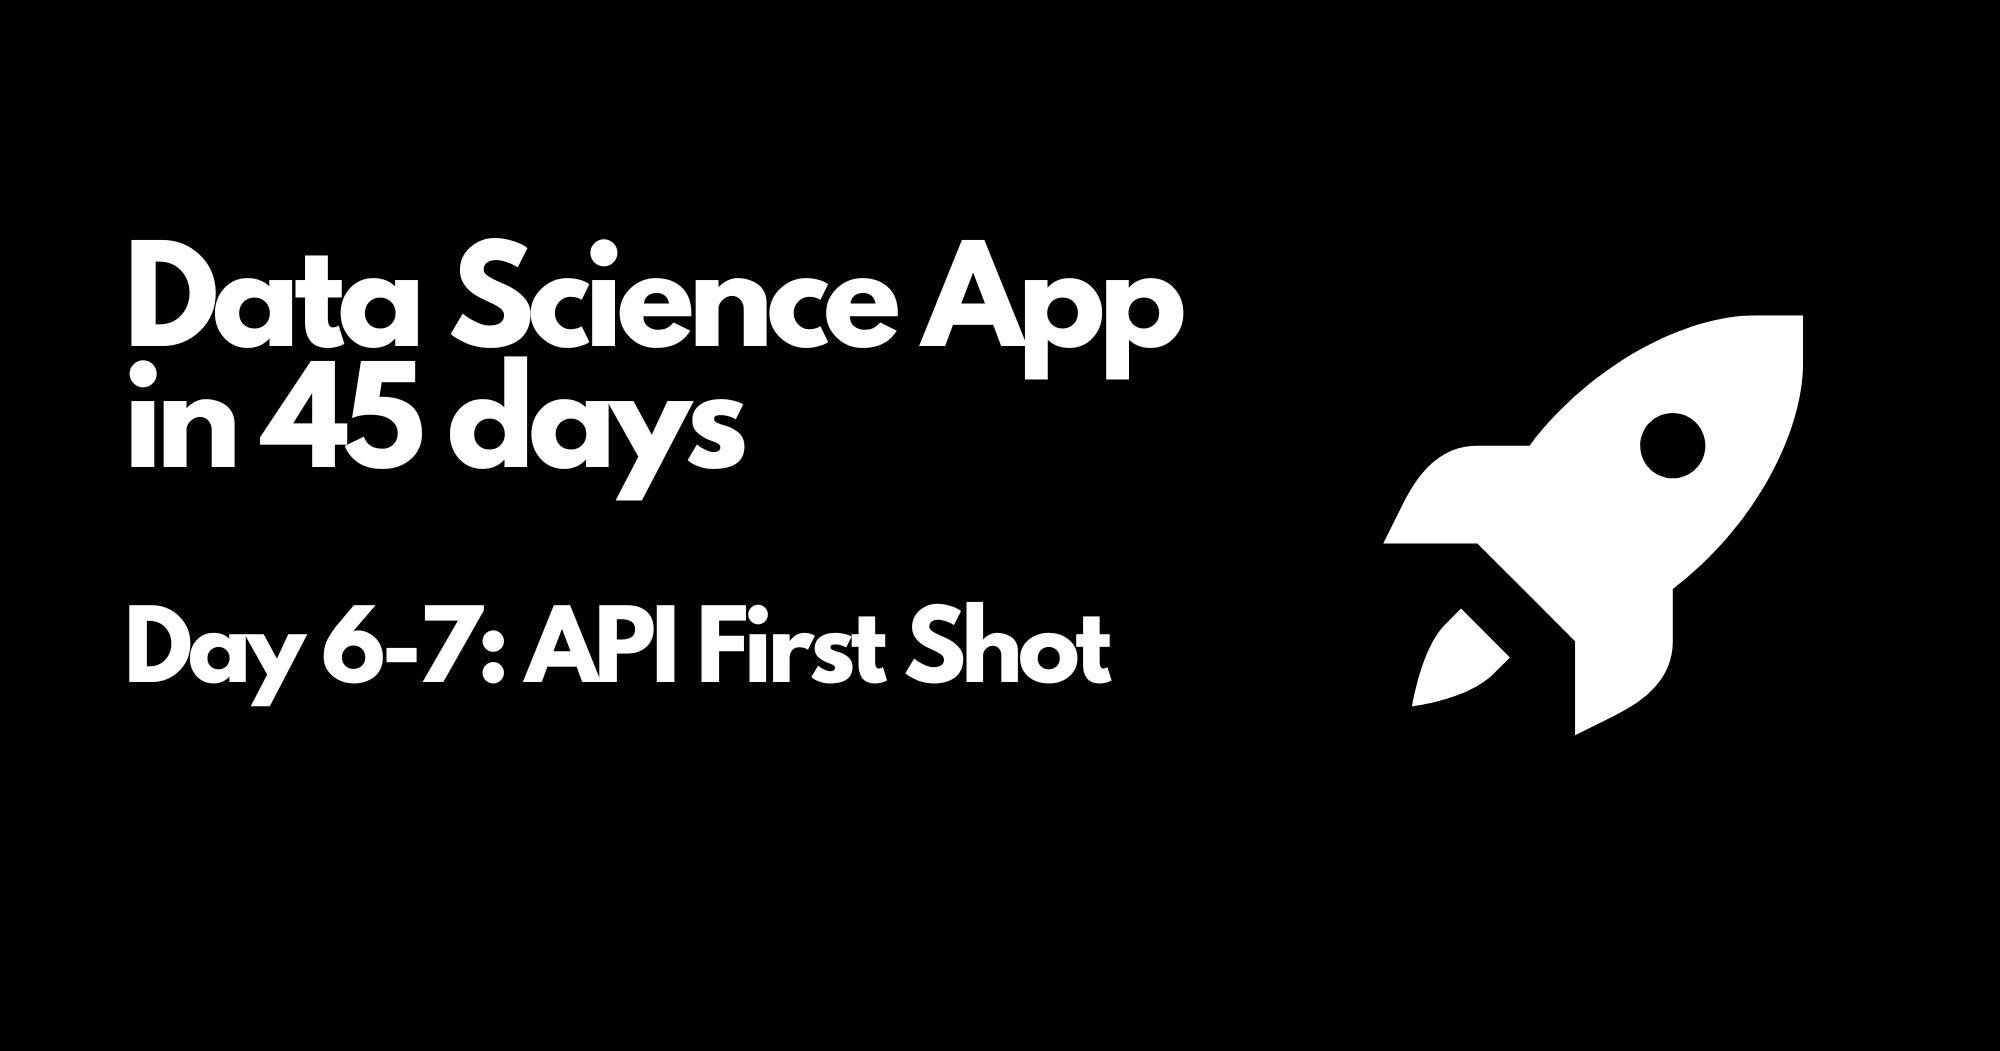 Day 6-7 - Data Science App in 45 days - API First Shot